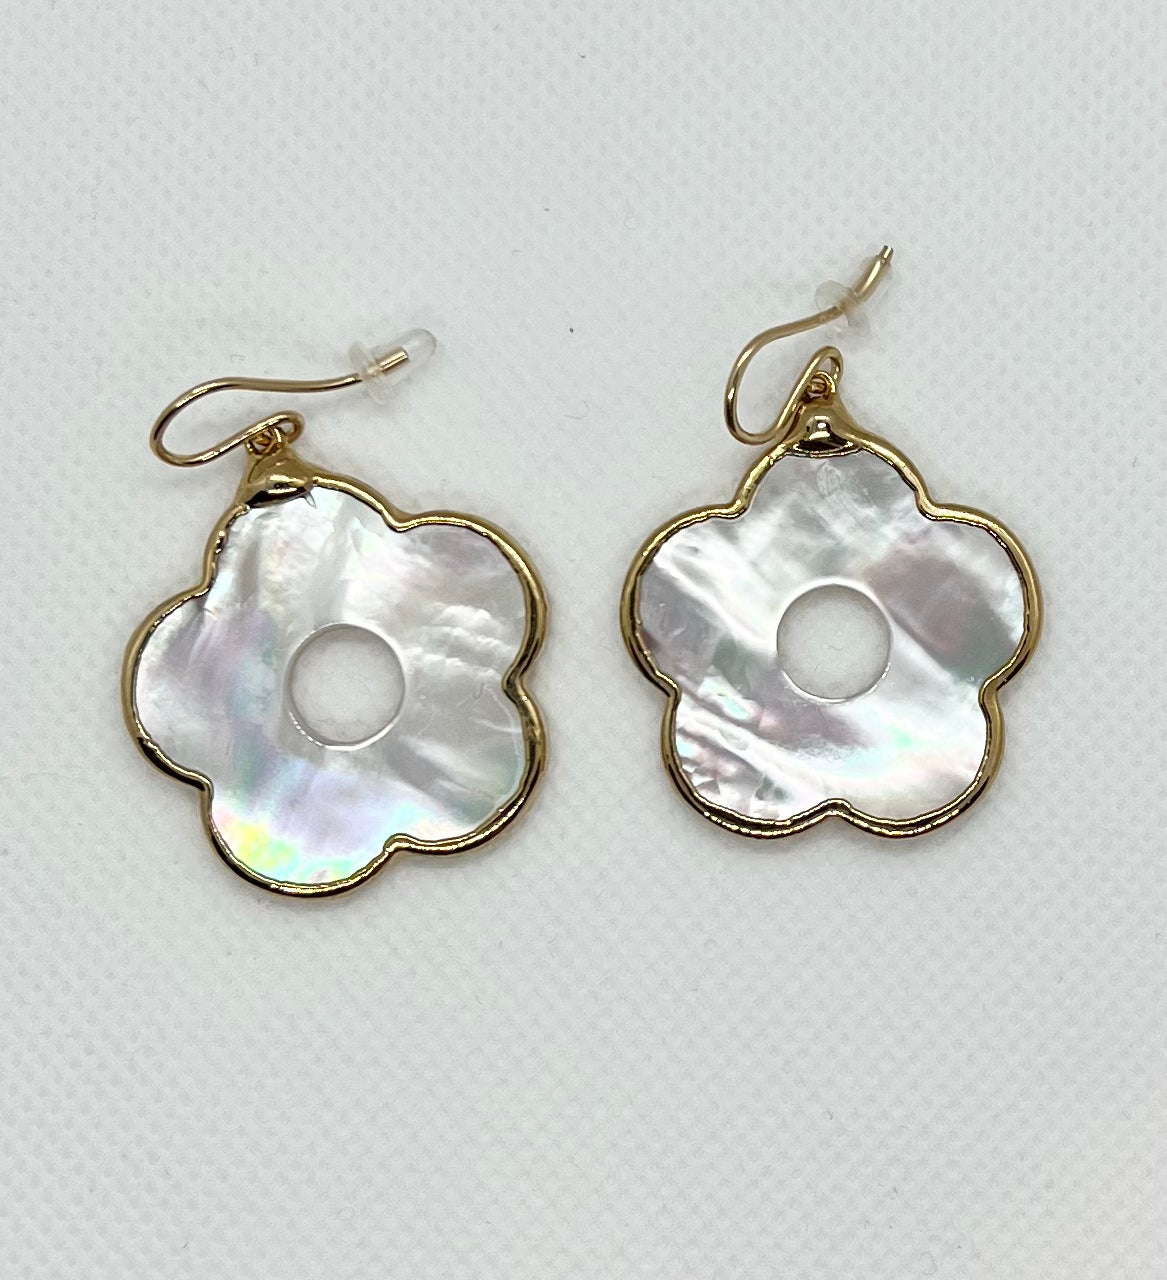 14KY Gold Filled Carved Mother of Pearl Flower Earrings